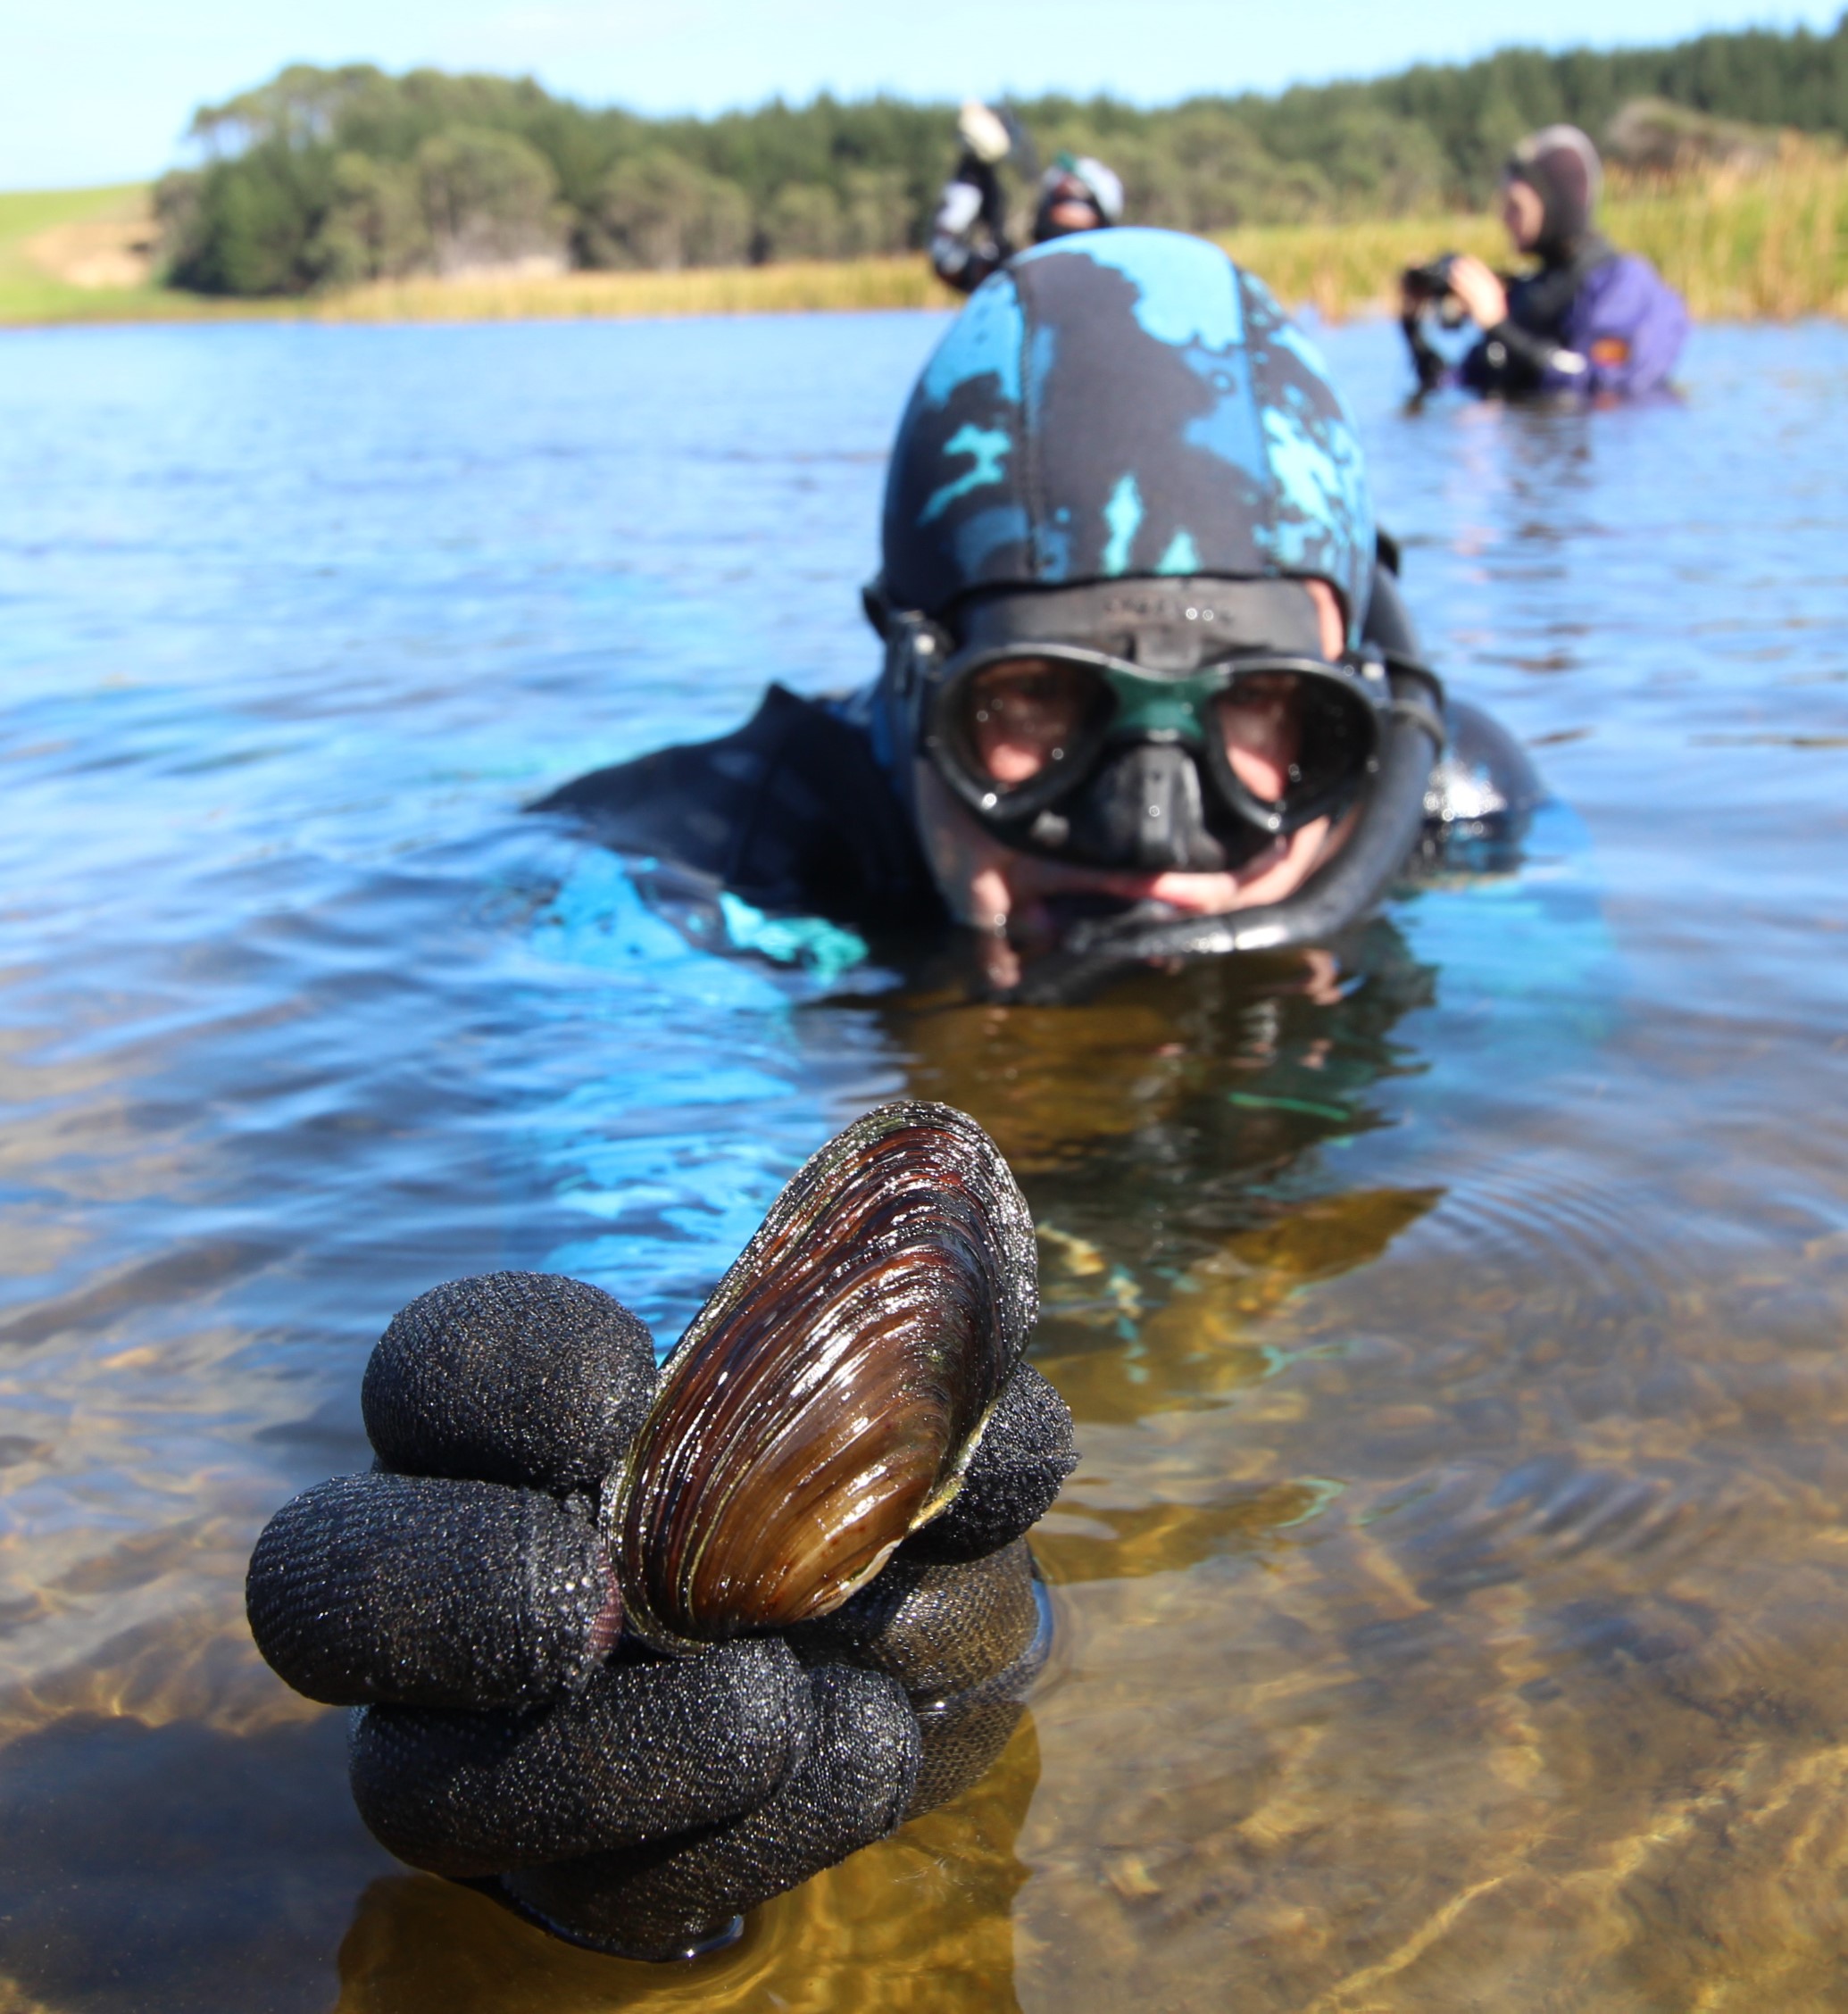 Although not part of the international study, Aupouri Peninsula dune lake ‘Ngakapua’ is home to kākahi (freshwater mussels), a threatened filter-feeding native species that could be impacted by microplastics.